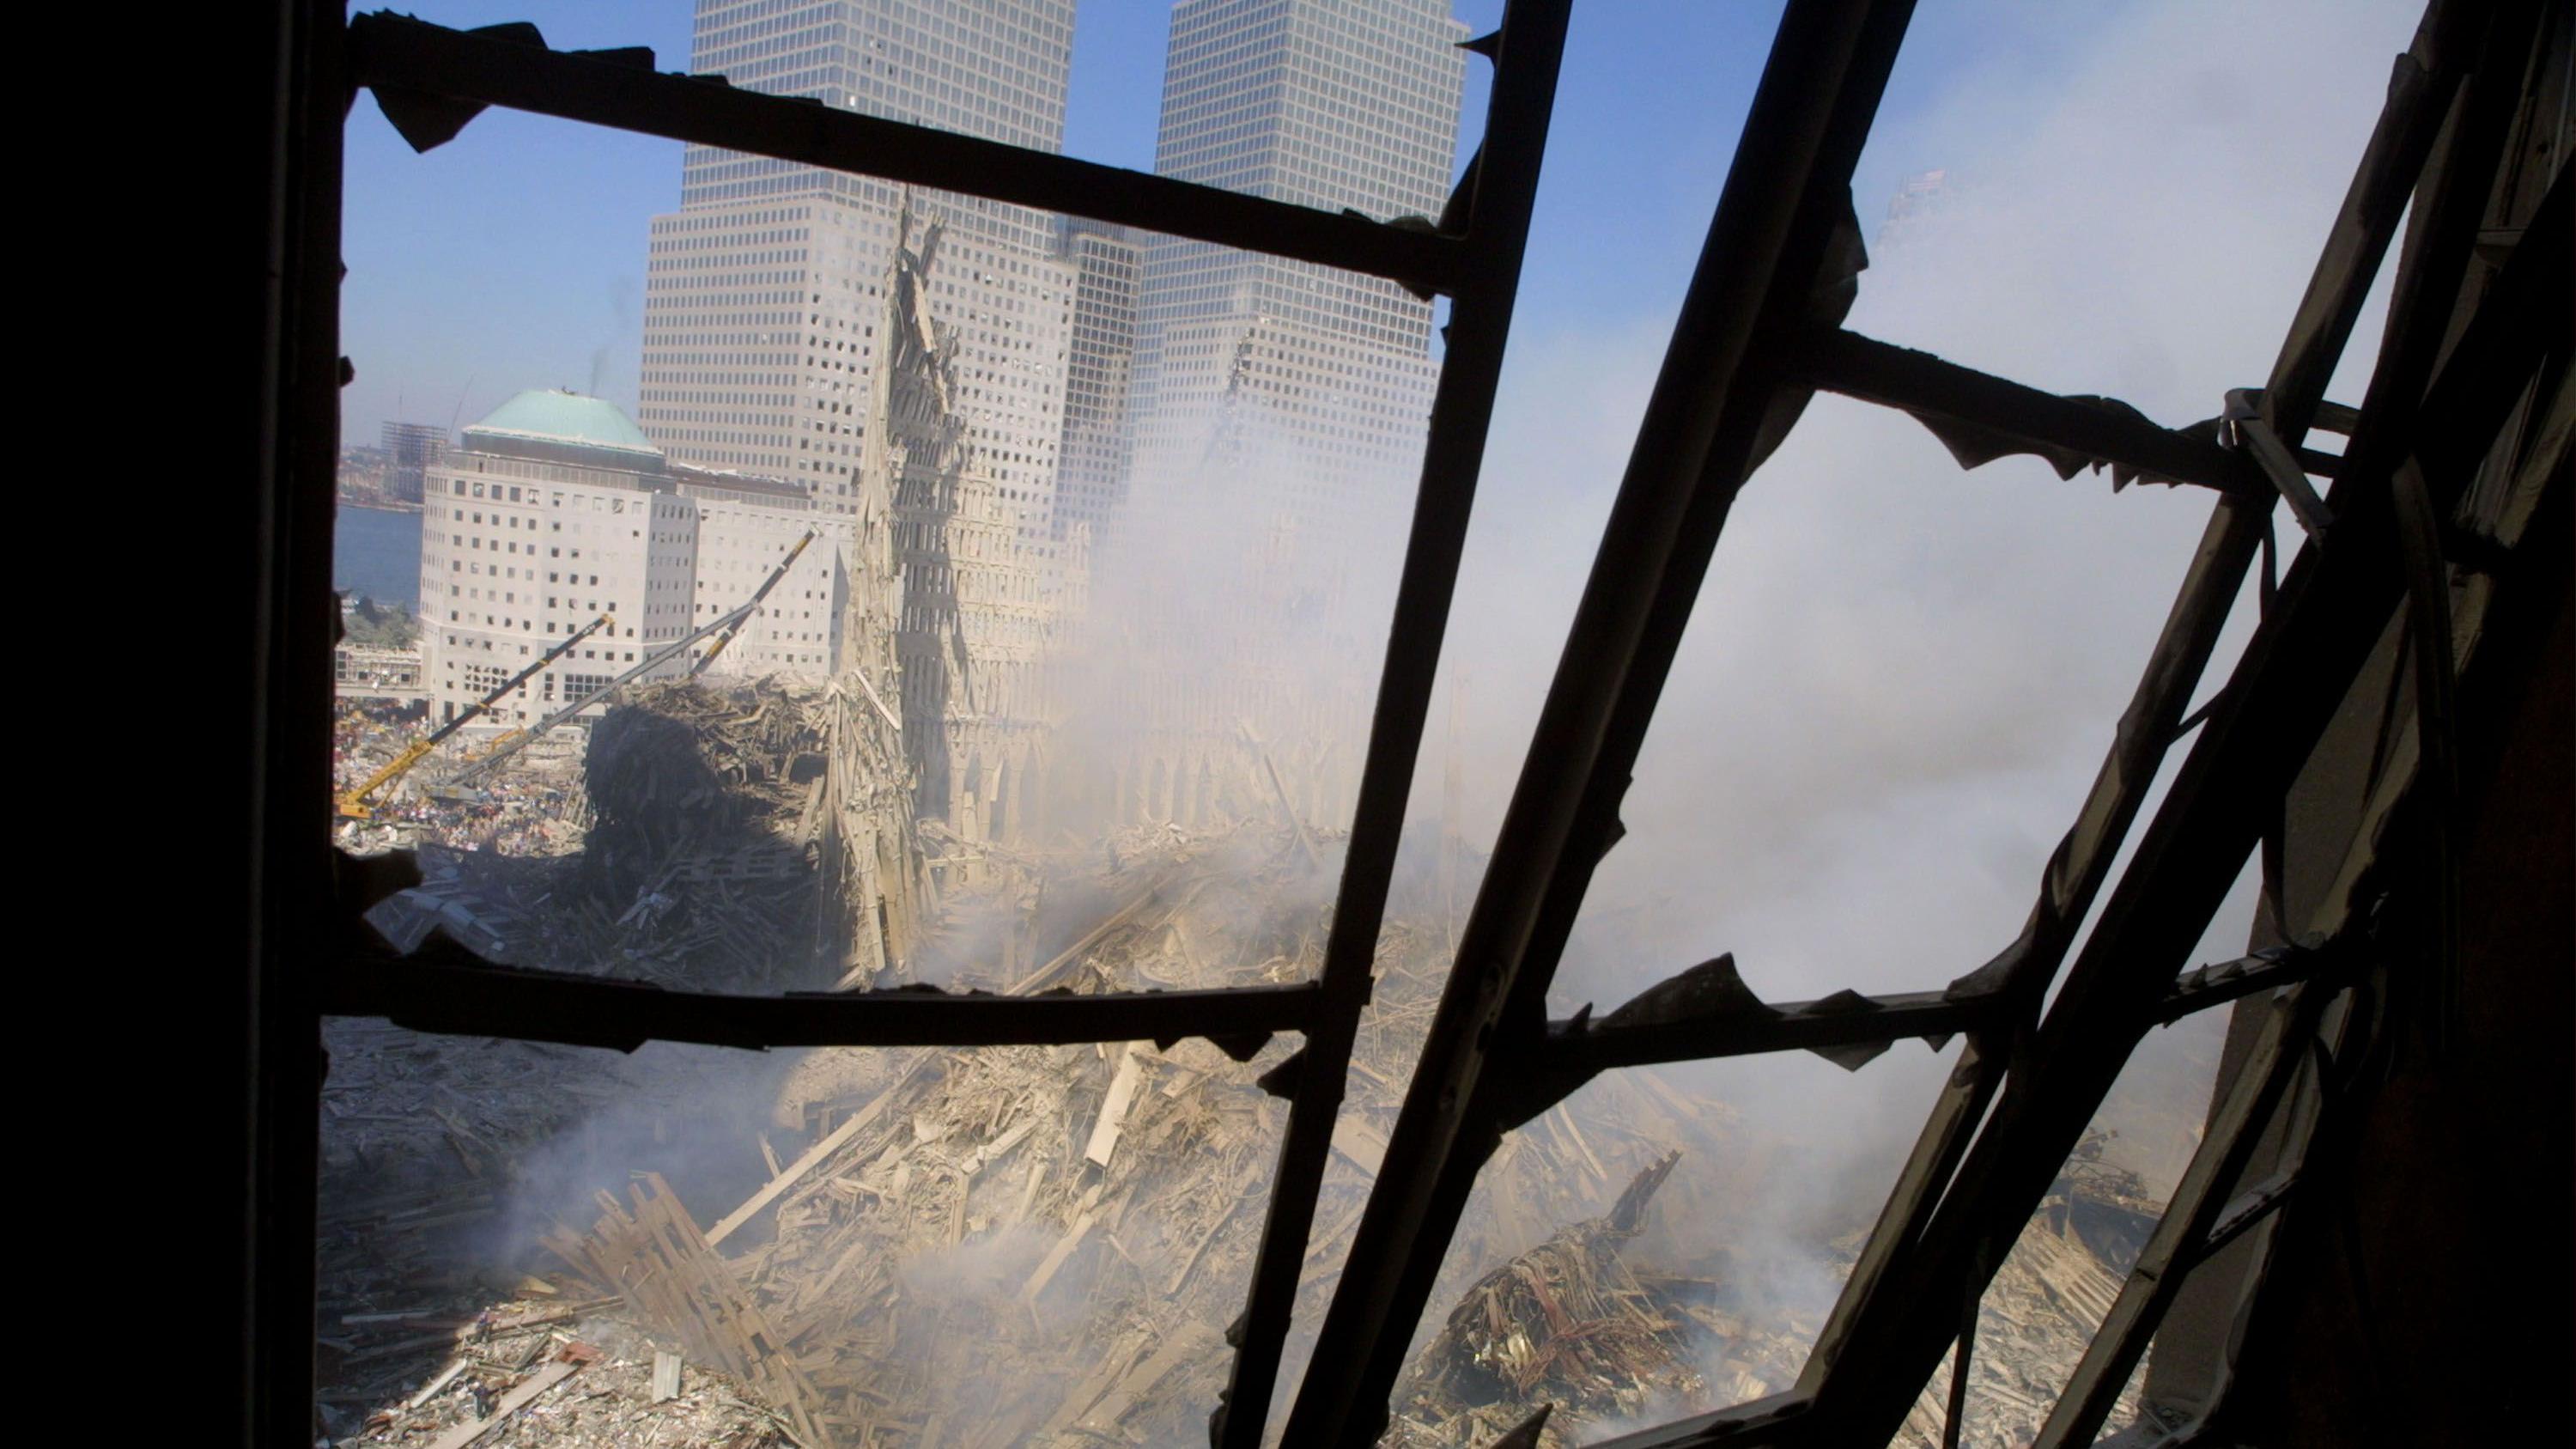 Plea deal with accused 9/11 plotters revoked - US government 